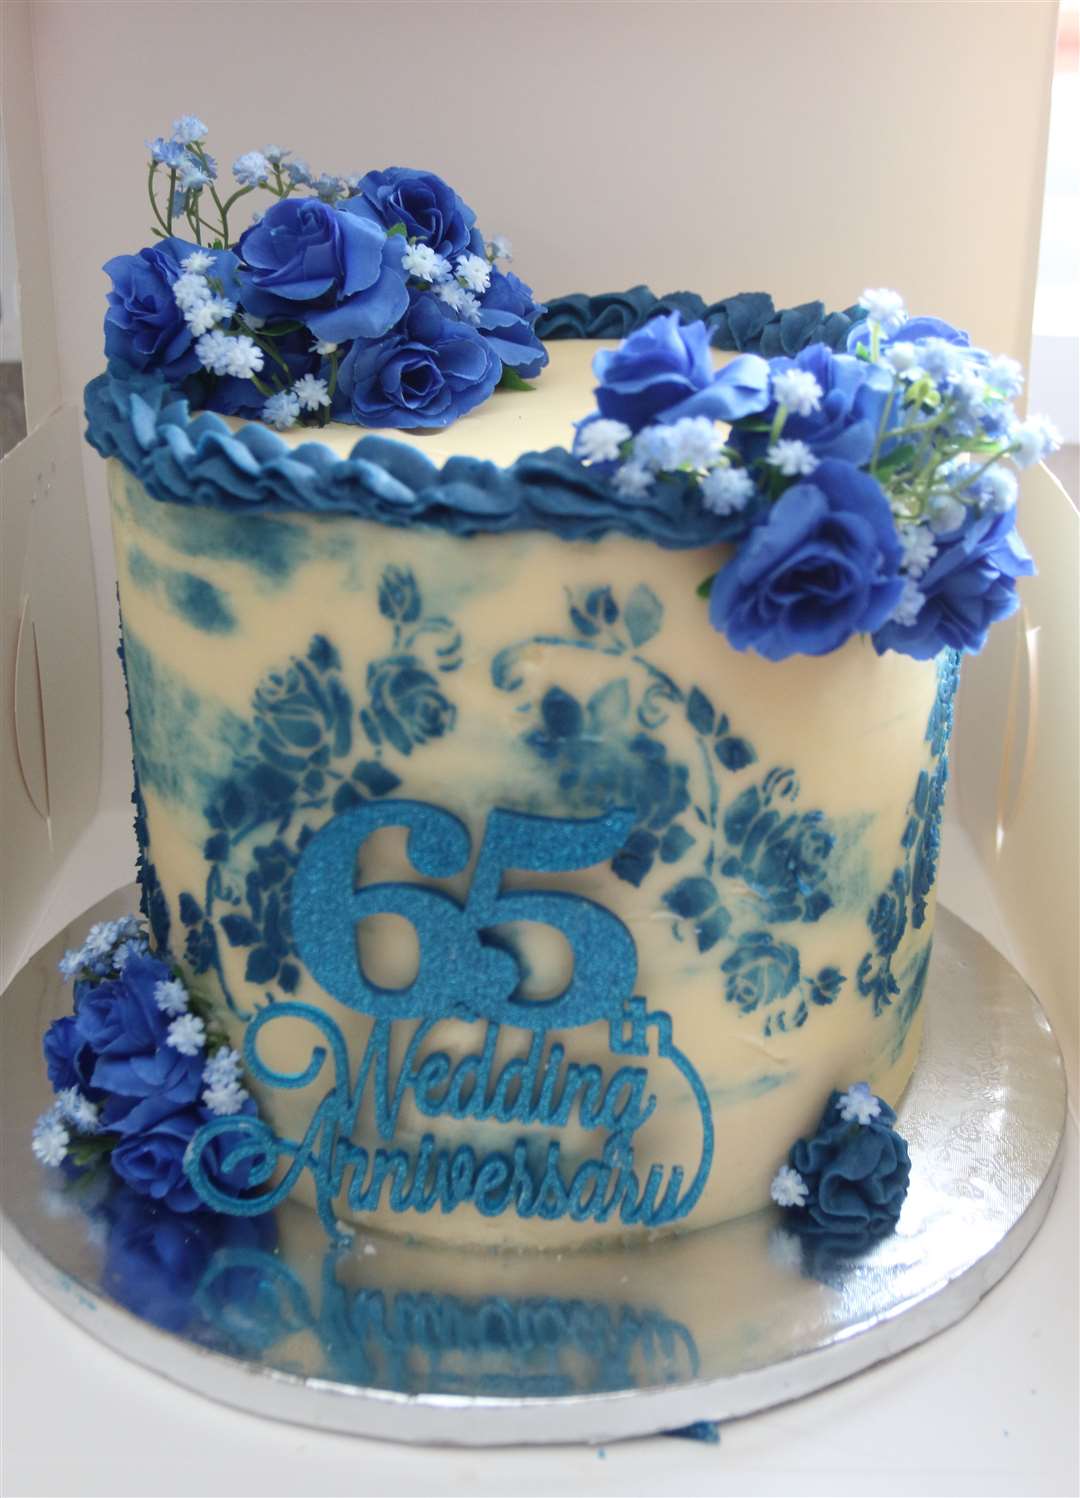 Thier anniversary cake was made by grand-daughter Jenna who runs Christie's Cake Creations in Huntly. Picture: David Porter